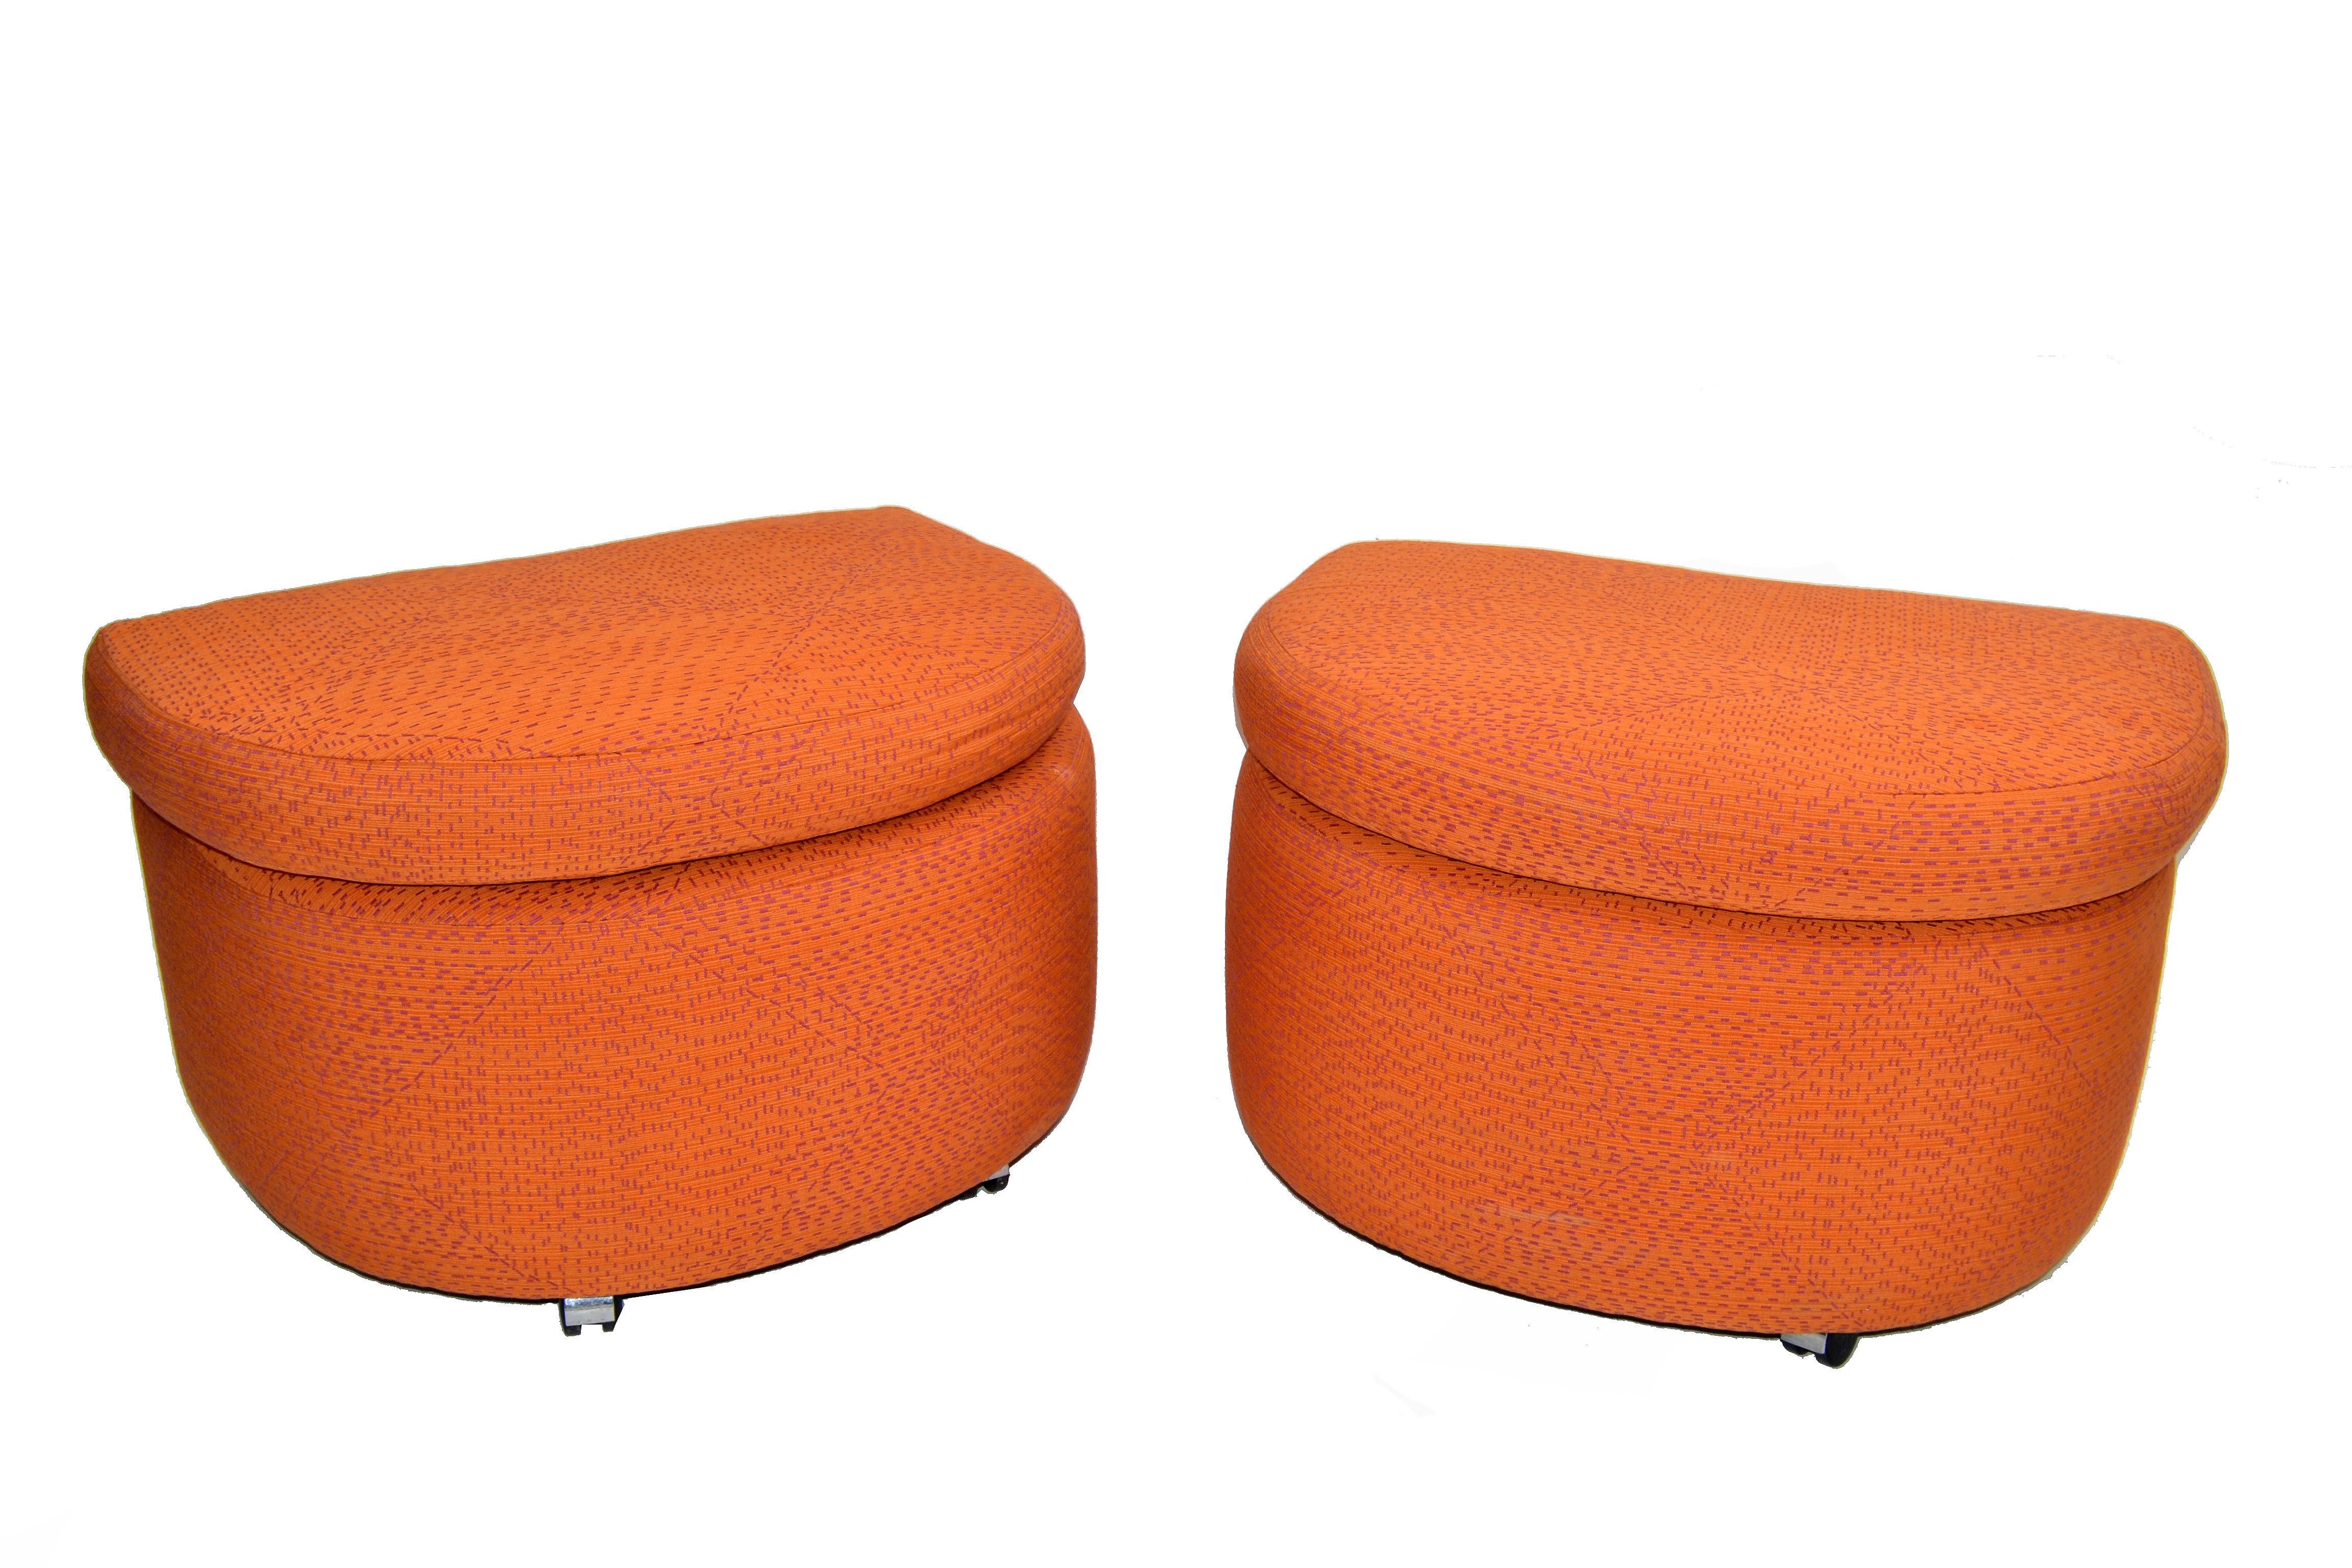 Mid-Century Modern Orange Cotton Upholstery Ottoman on Casters & Cushions - Pair For Sale 4